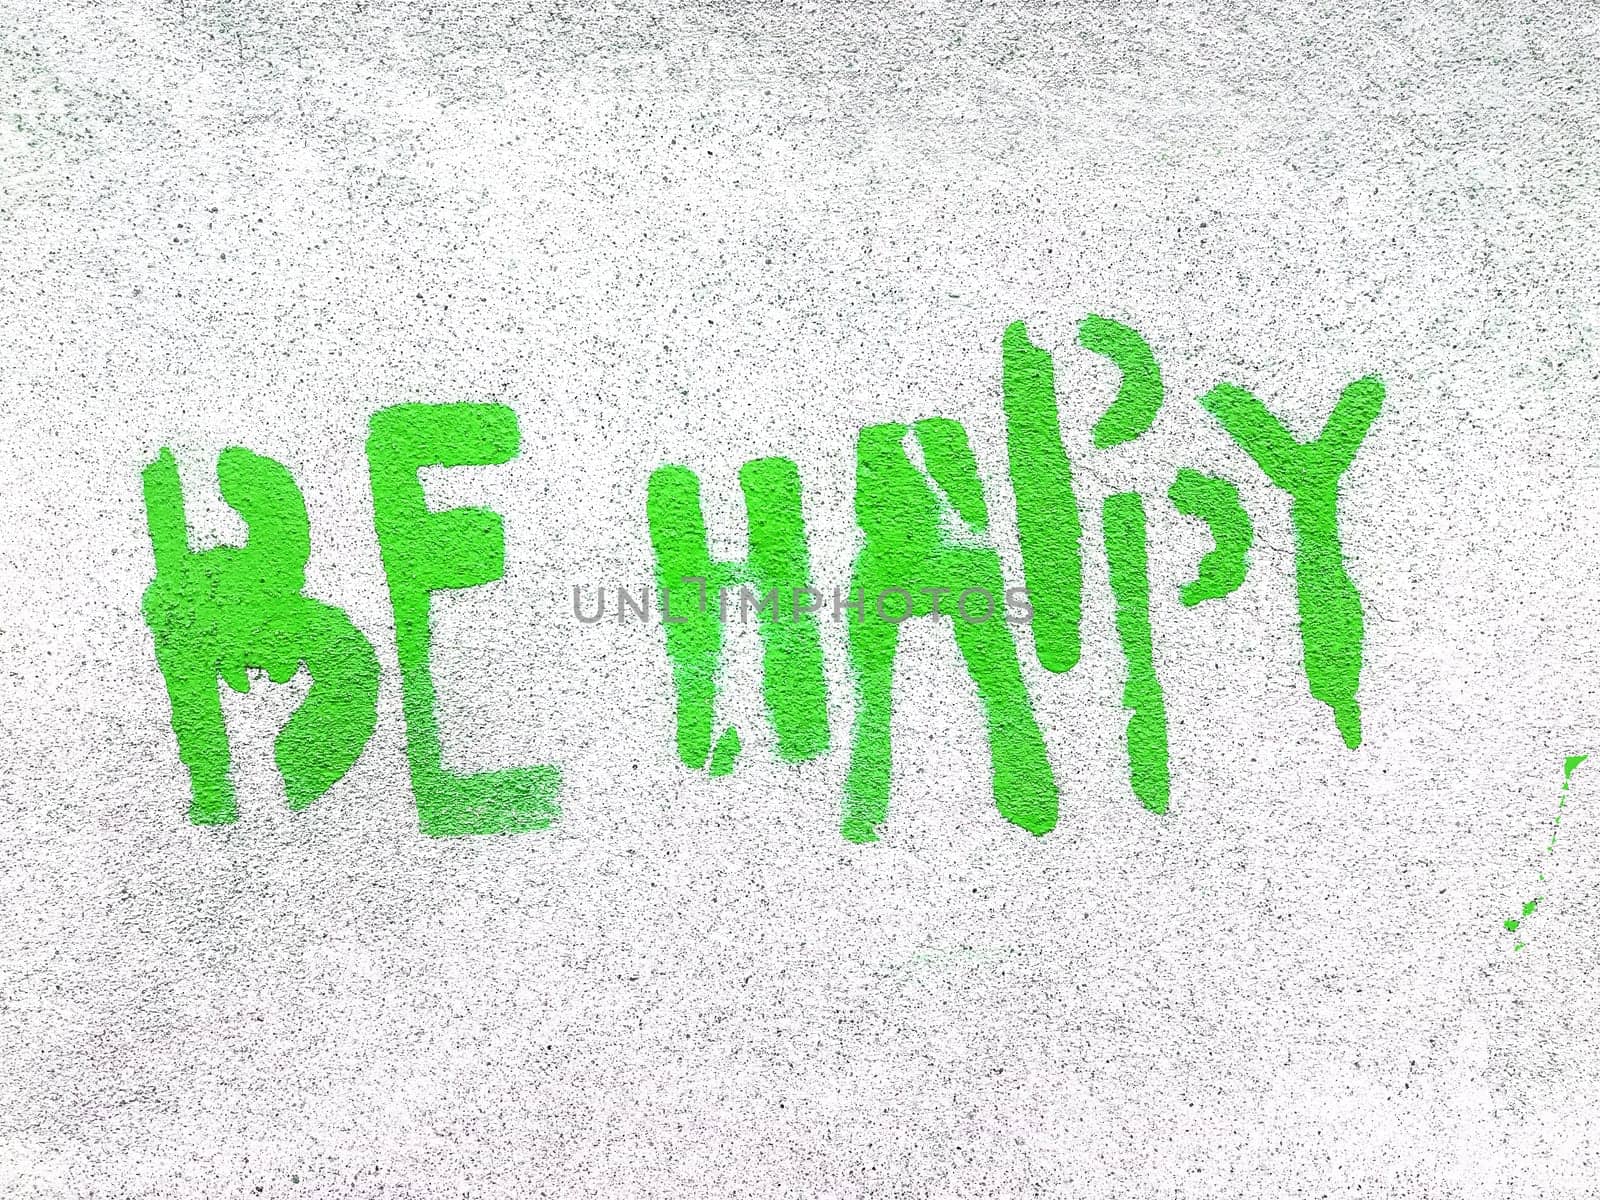 Green Be Happy written in graffiti style with rough texture isolated on gray background.